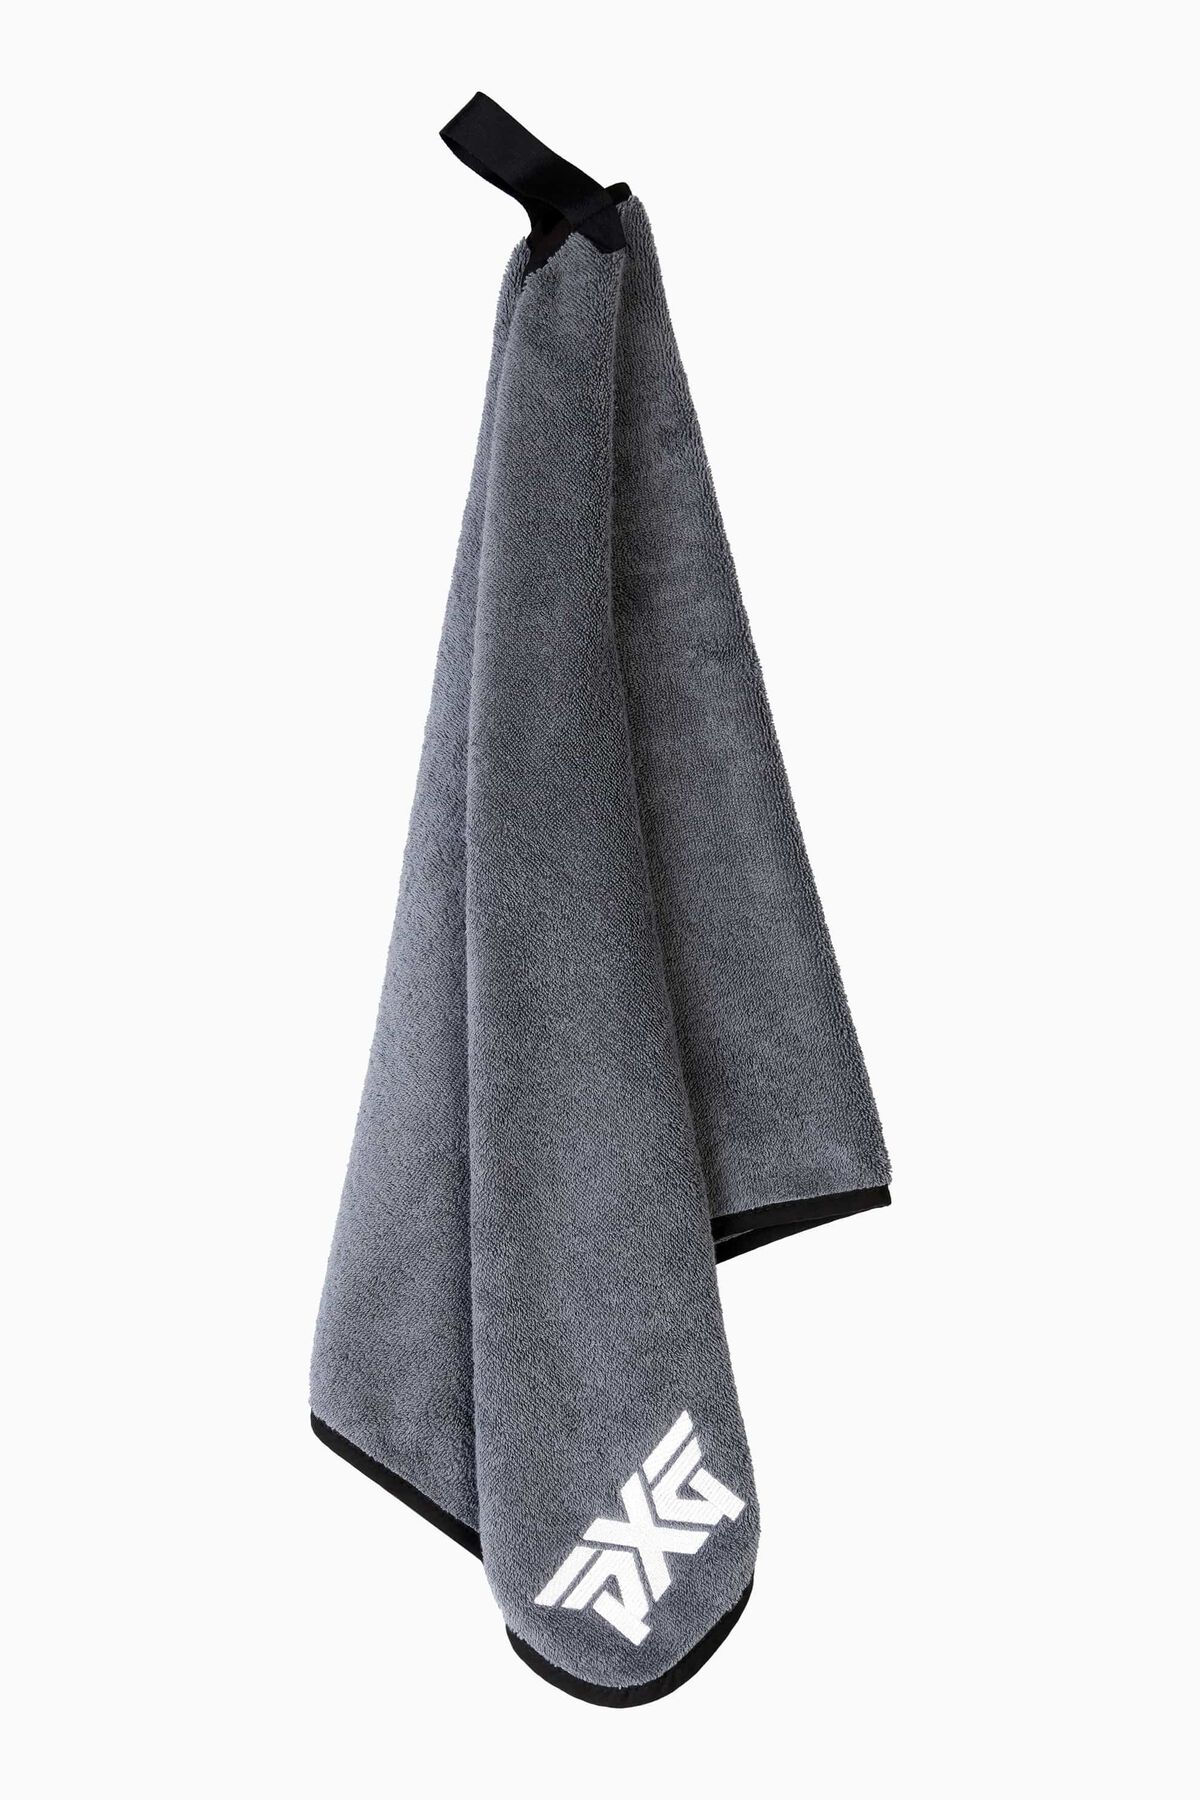 Terry Cloth Players Towel | Golf Towels | PXG